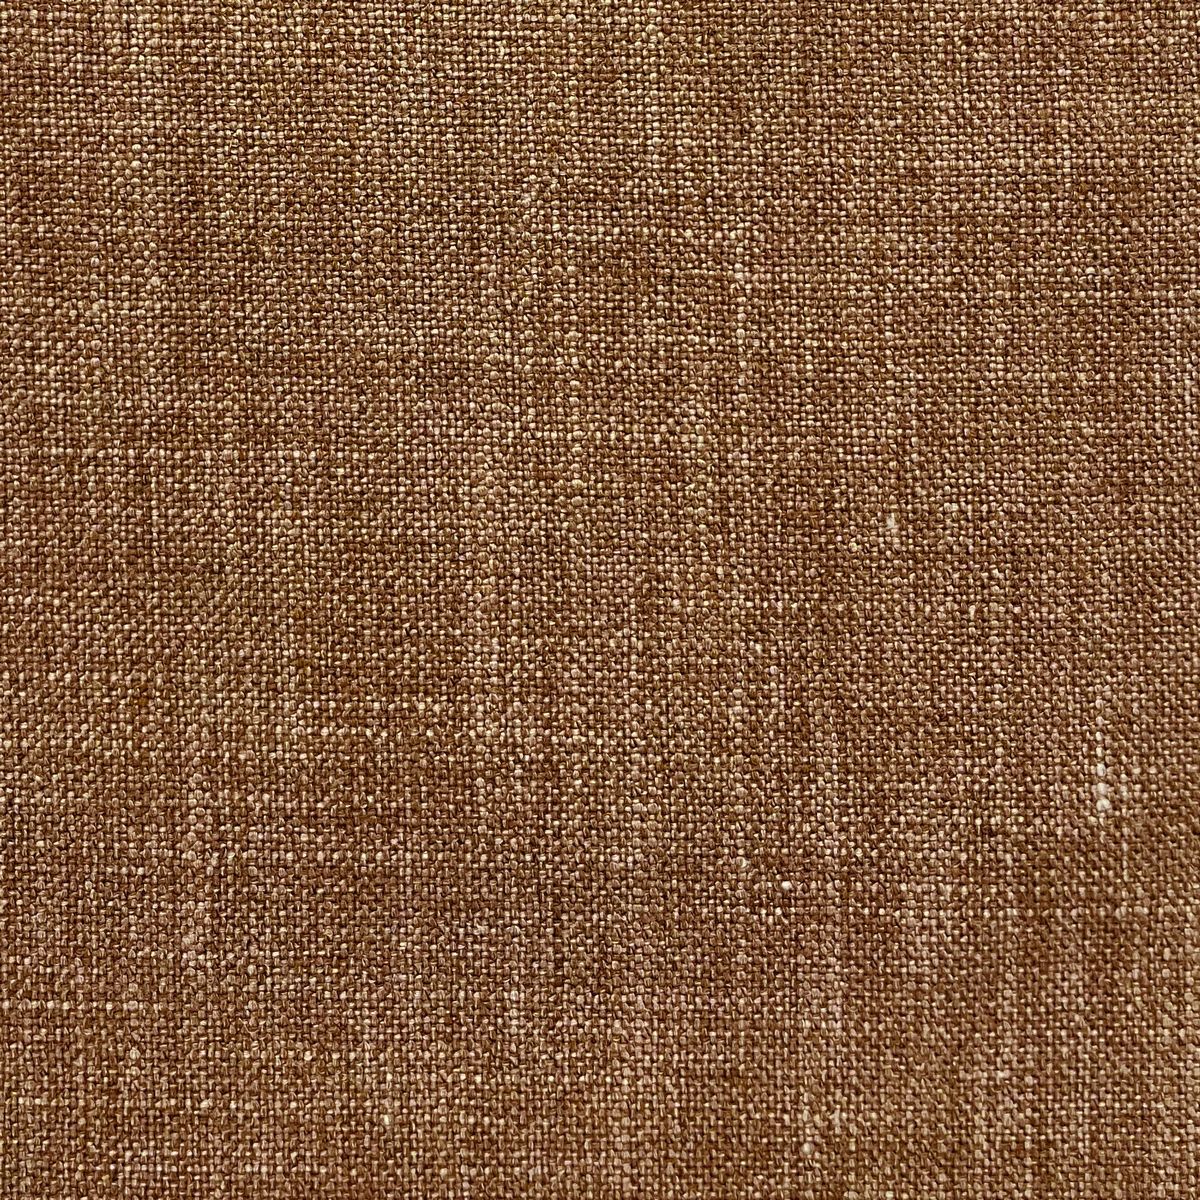 Cotswold Chestnut Fabric by Chatham Glyn